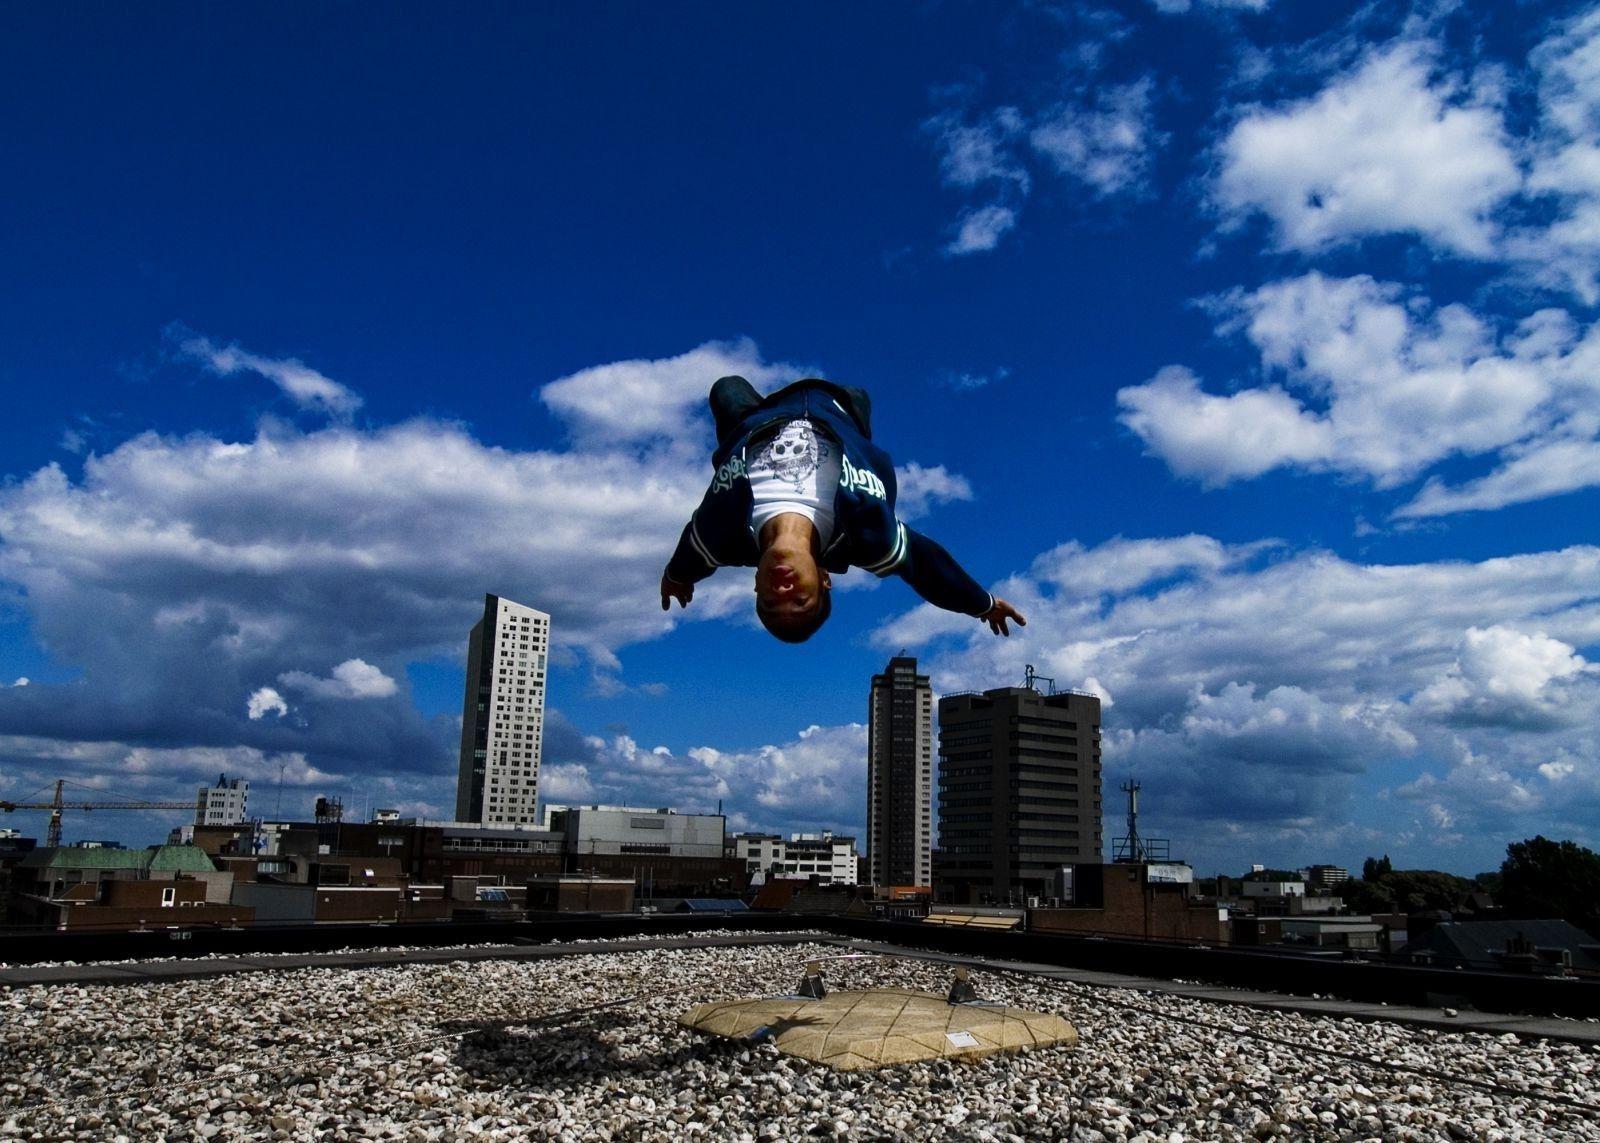 The guy doing parkour performs a backflip on the roof. iPhone